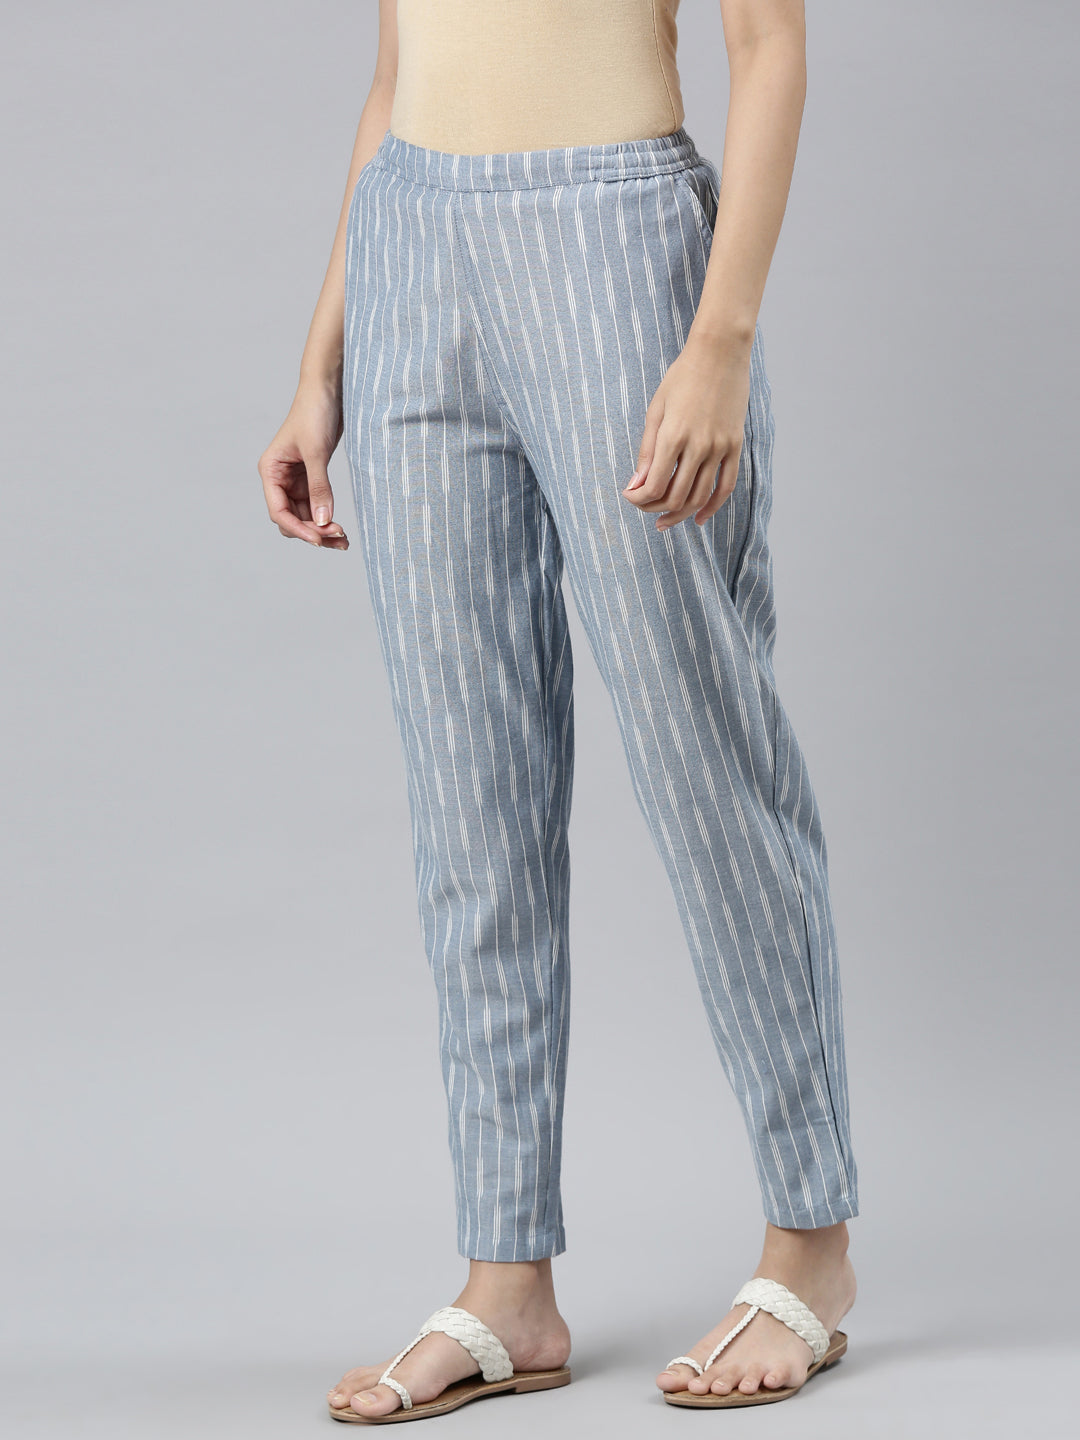 Linen Trousers for Women  Classy and Casual  Linenfox